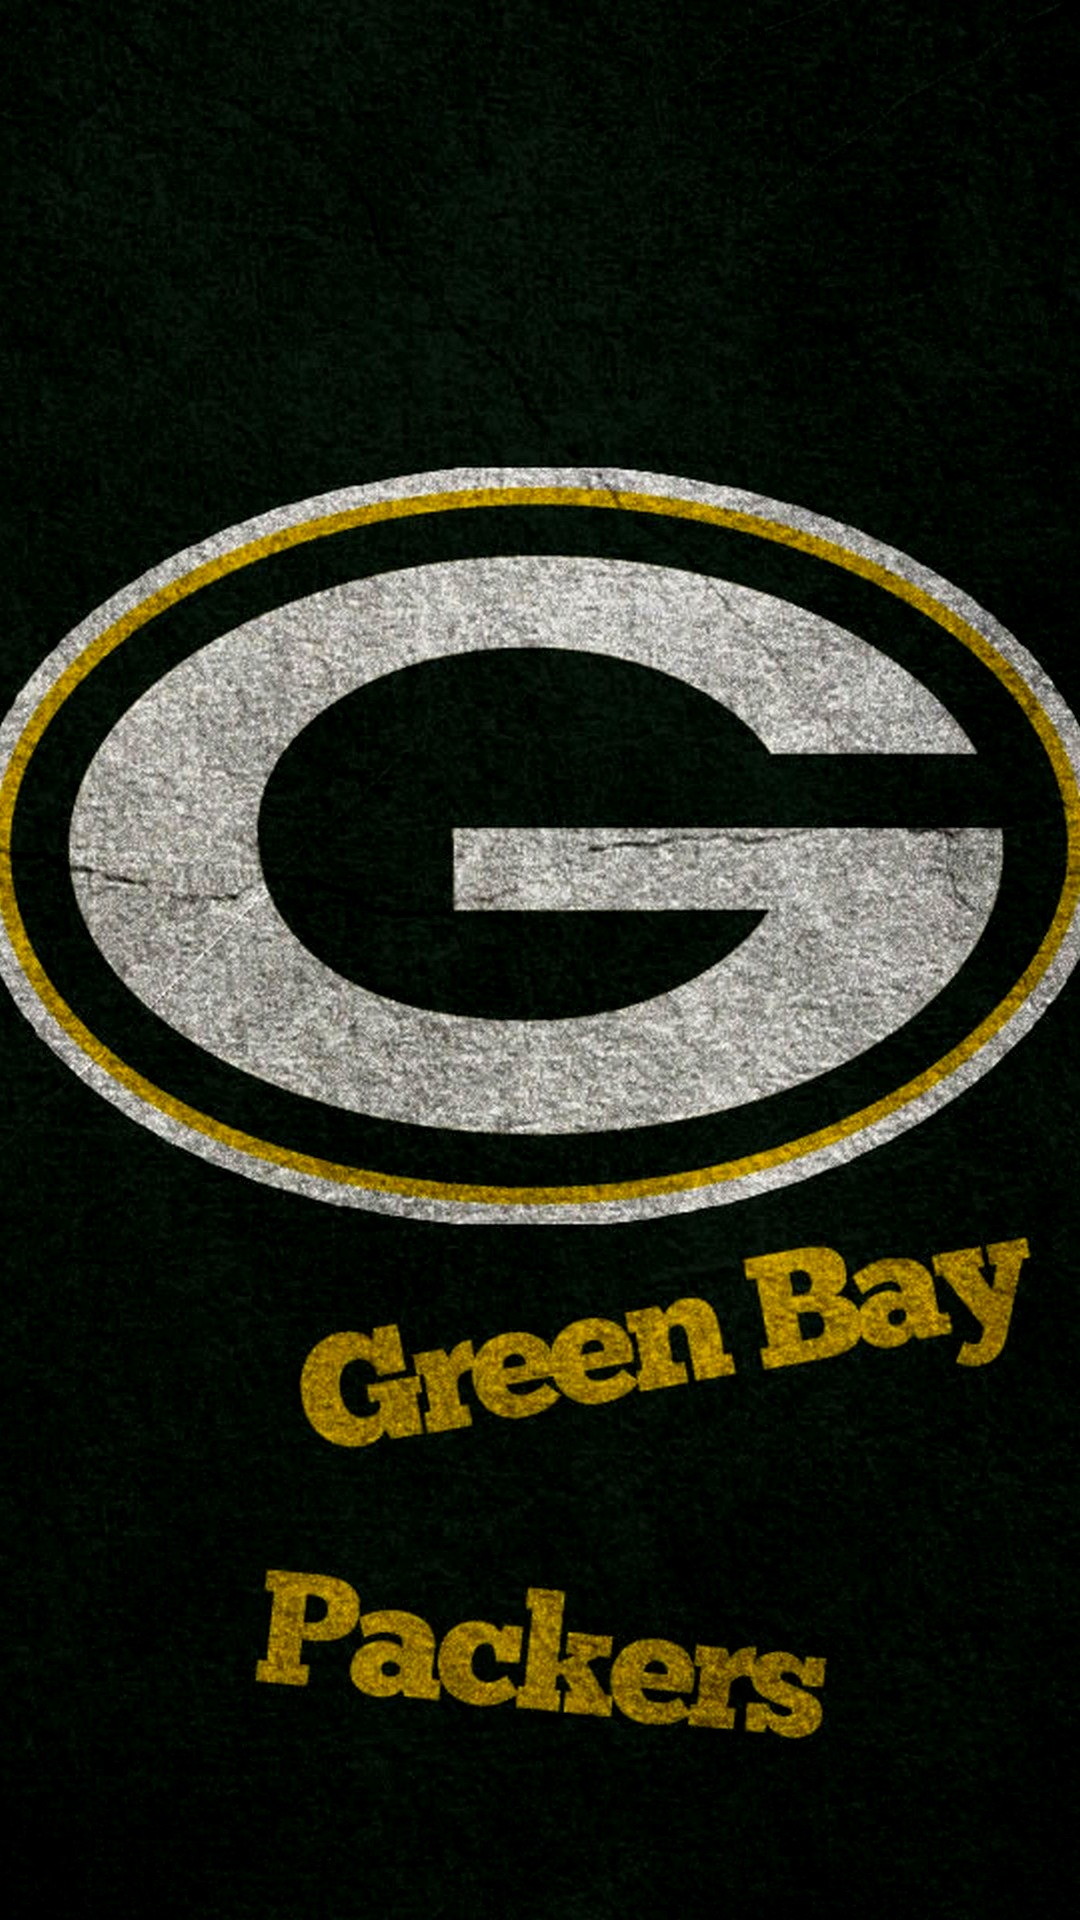 Green Bay Packers Wallpaper For Mobile with high-resolution 1080x1920 pixel. You can use and set as wallpaper for Notebook Screensavers, Mac Wallpapers, Mobile Home Screen, iPhone or Android Phones Lock Screen